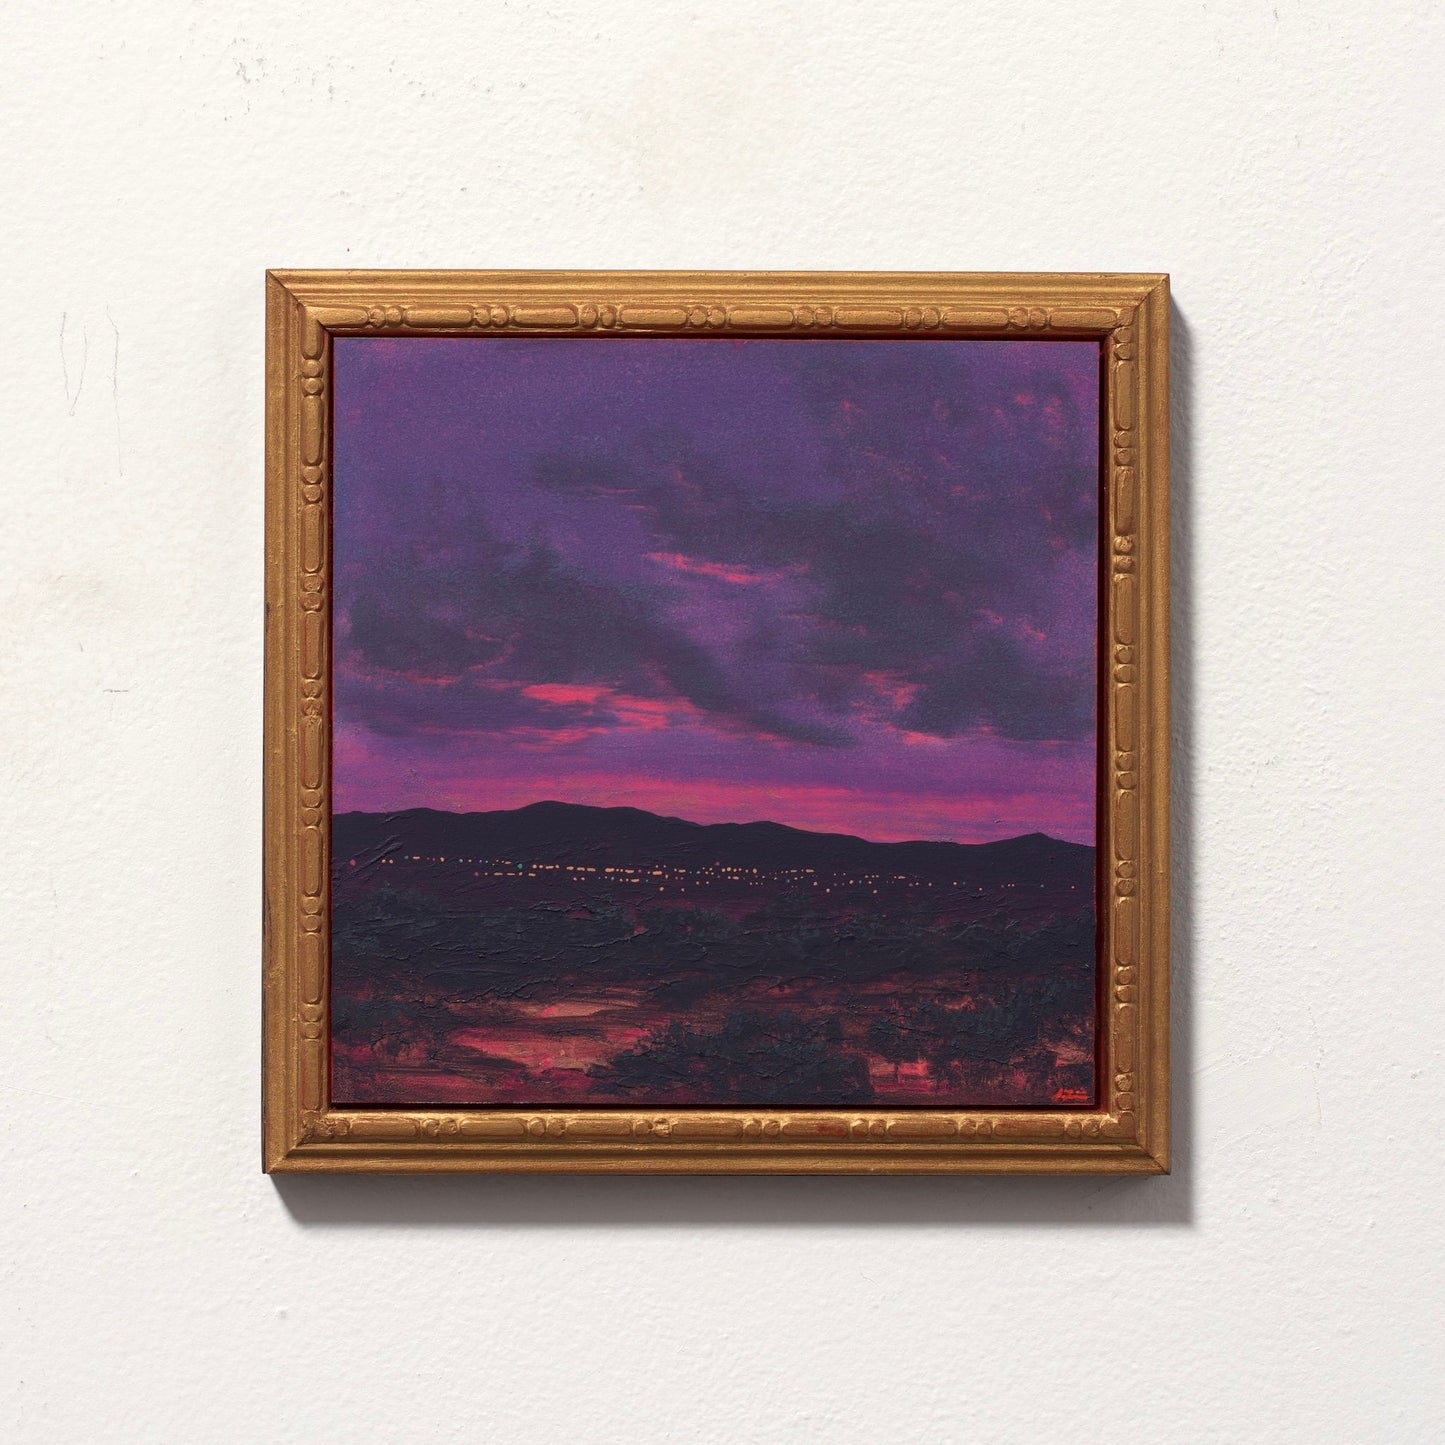 Santa Fe Nocturne Series 04, No.01 - Original Southwest Landscape Oil Painting - 8 x 8 inches in handmade frame